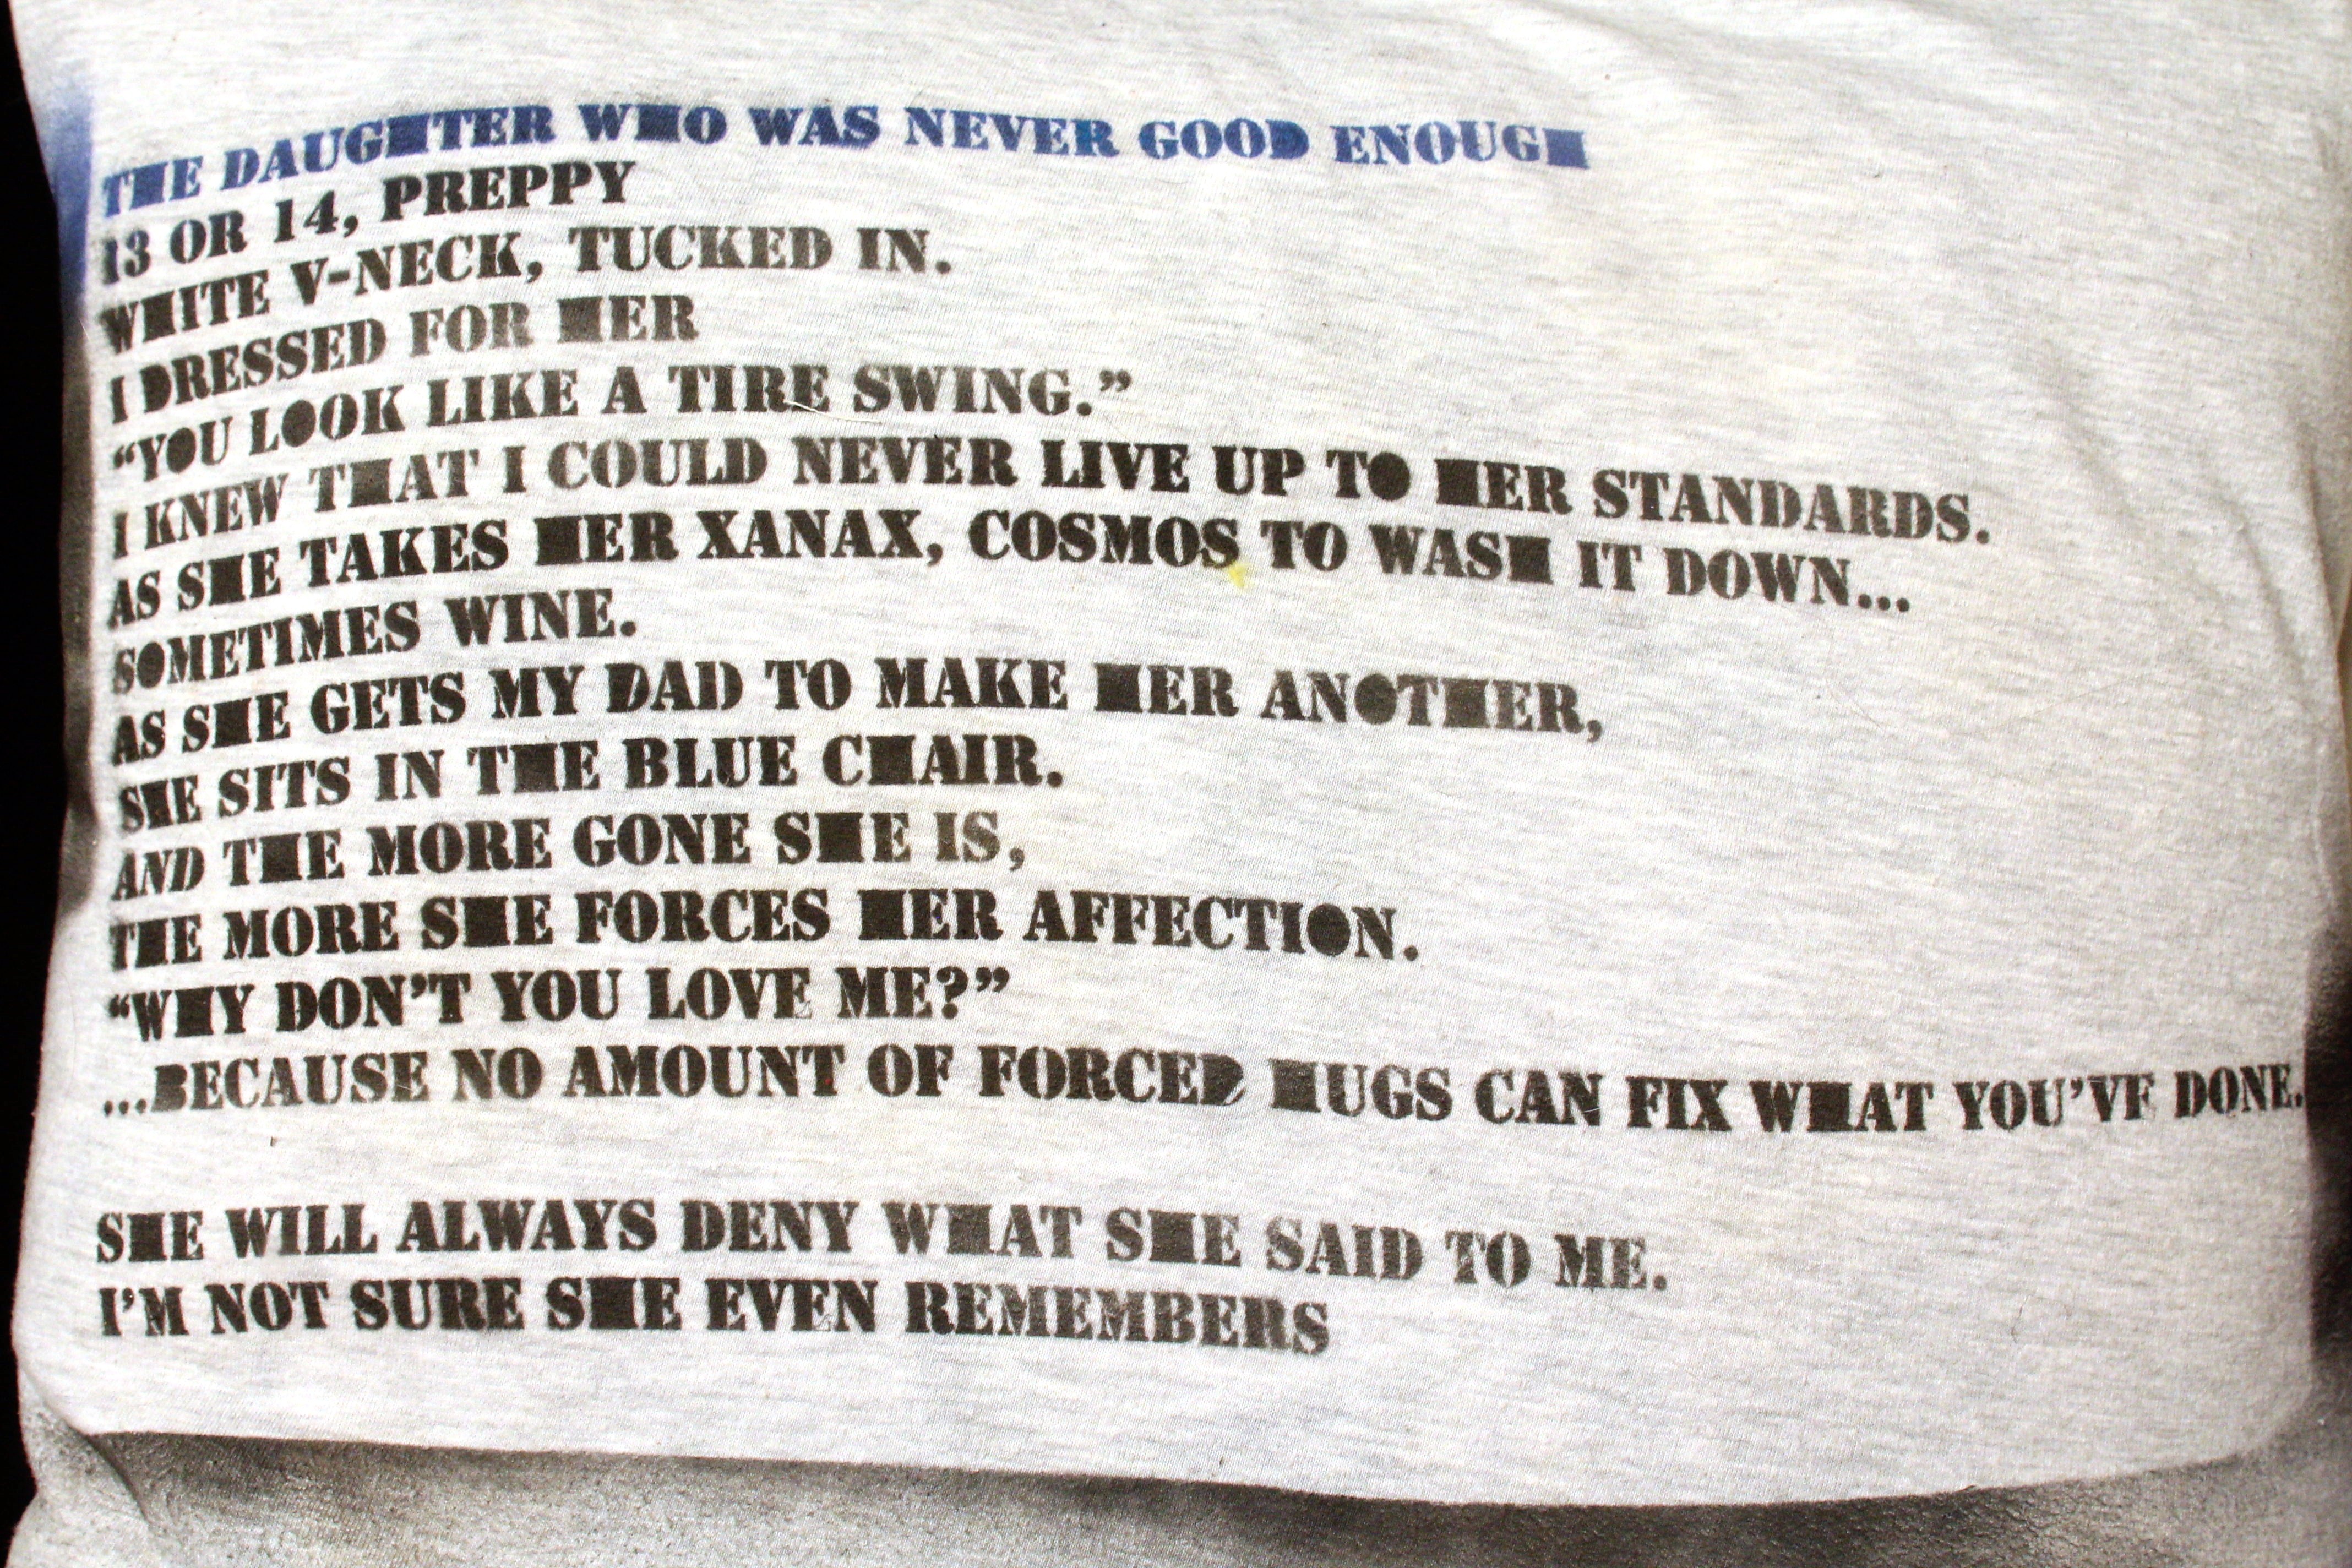 poem on pillow: THE DAUGHTER WHO WAS NEVER GOOD ENOUGH 13 OR 14, PREPPY WHITE V-NECK, TUCKED IN. I DRESSED FOR HER “YOU LOOK LIKE A TIRE SWING.” I KNEW THAT I COULD NEVER LIVE UP TO HER STANDARDS. AS SHE TAKES HER XANAX, COSMOS TO WASH IT DOWN… SOMETIMES WINE. AS SHE GETS MY DAD TO MAKE HER ANOTHER, SHE SITS IN THE BLUE CHAIR. AND THE MORE GONE SHE IS, THE MORE SHE FORCES HER AFFECTION. “WHY DON’T YOU LOVE ME?” ...BECAUSE NO AMOUNT OF FORCED HUGS CAN FIX WHAT YOU’VE DONE.  SHE WILL ALWAYS DENY WHAT SHE SAID TO ME. I’M NOT SURE SHE EVEN REMEMBERS